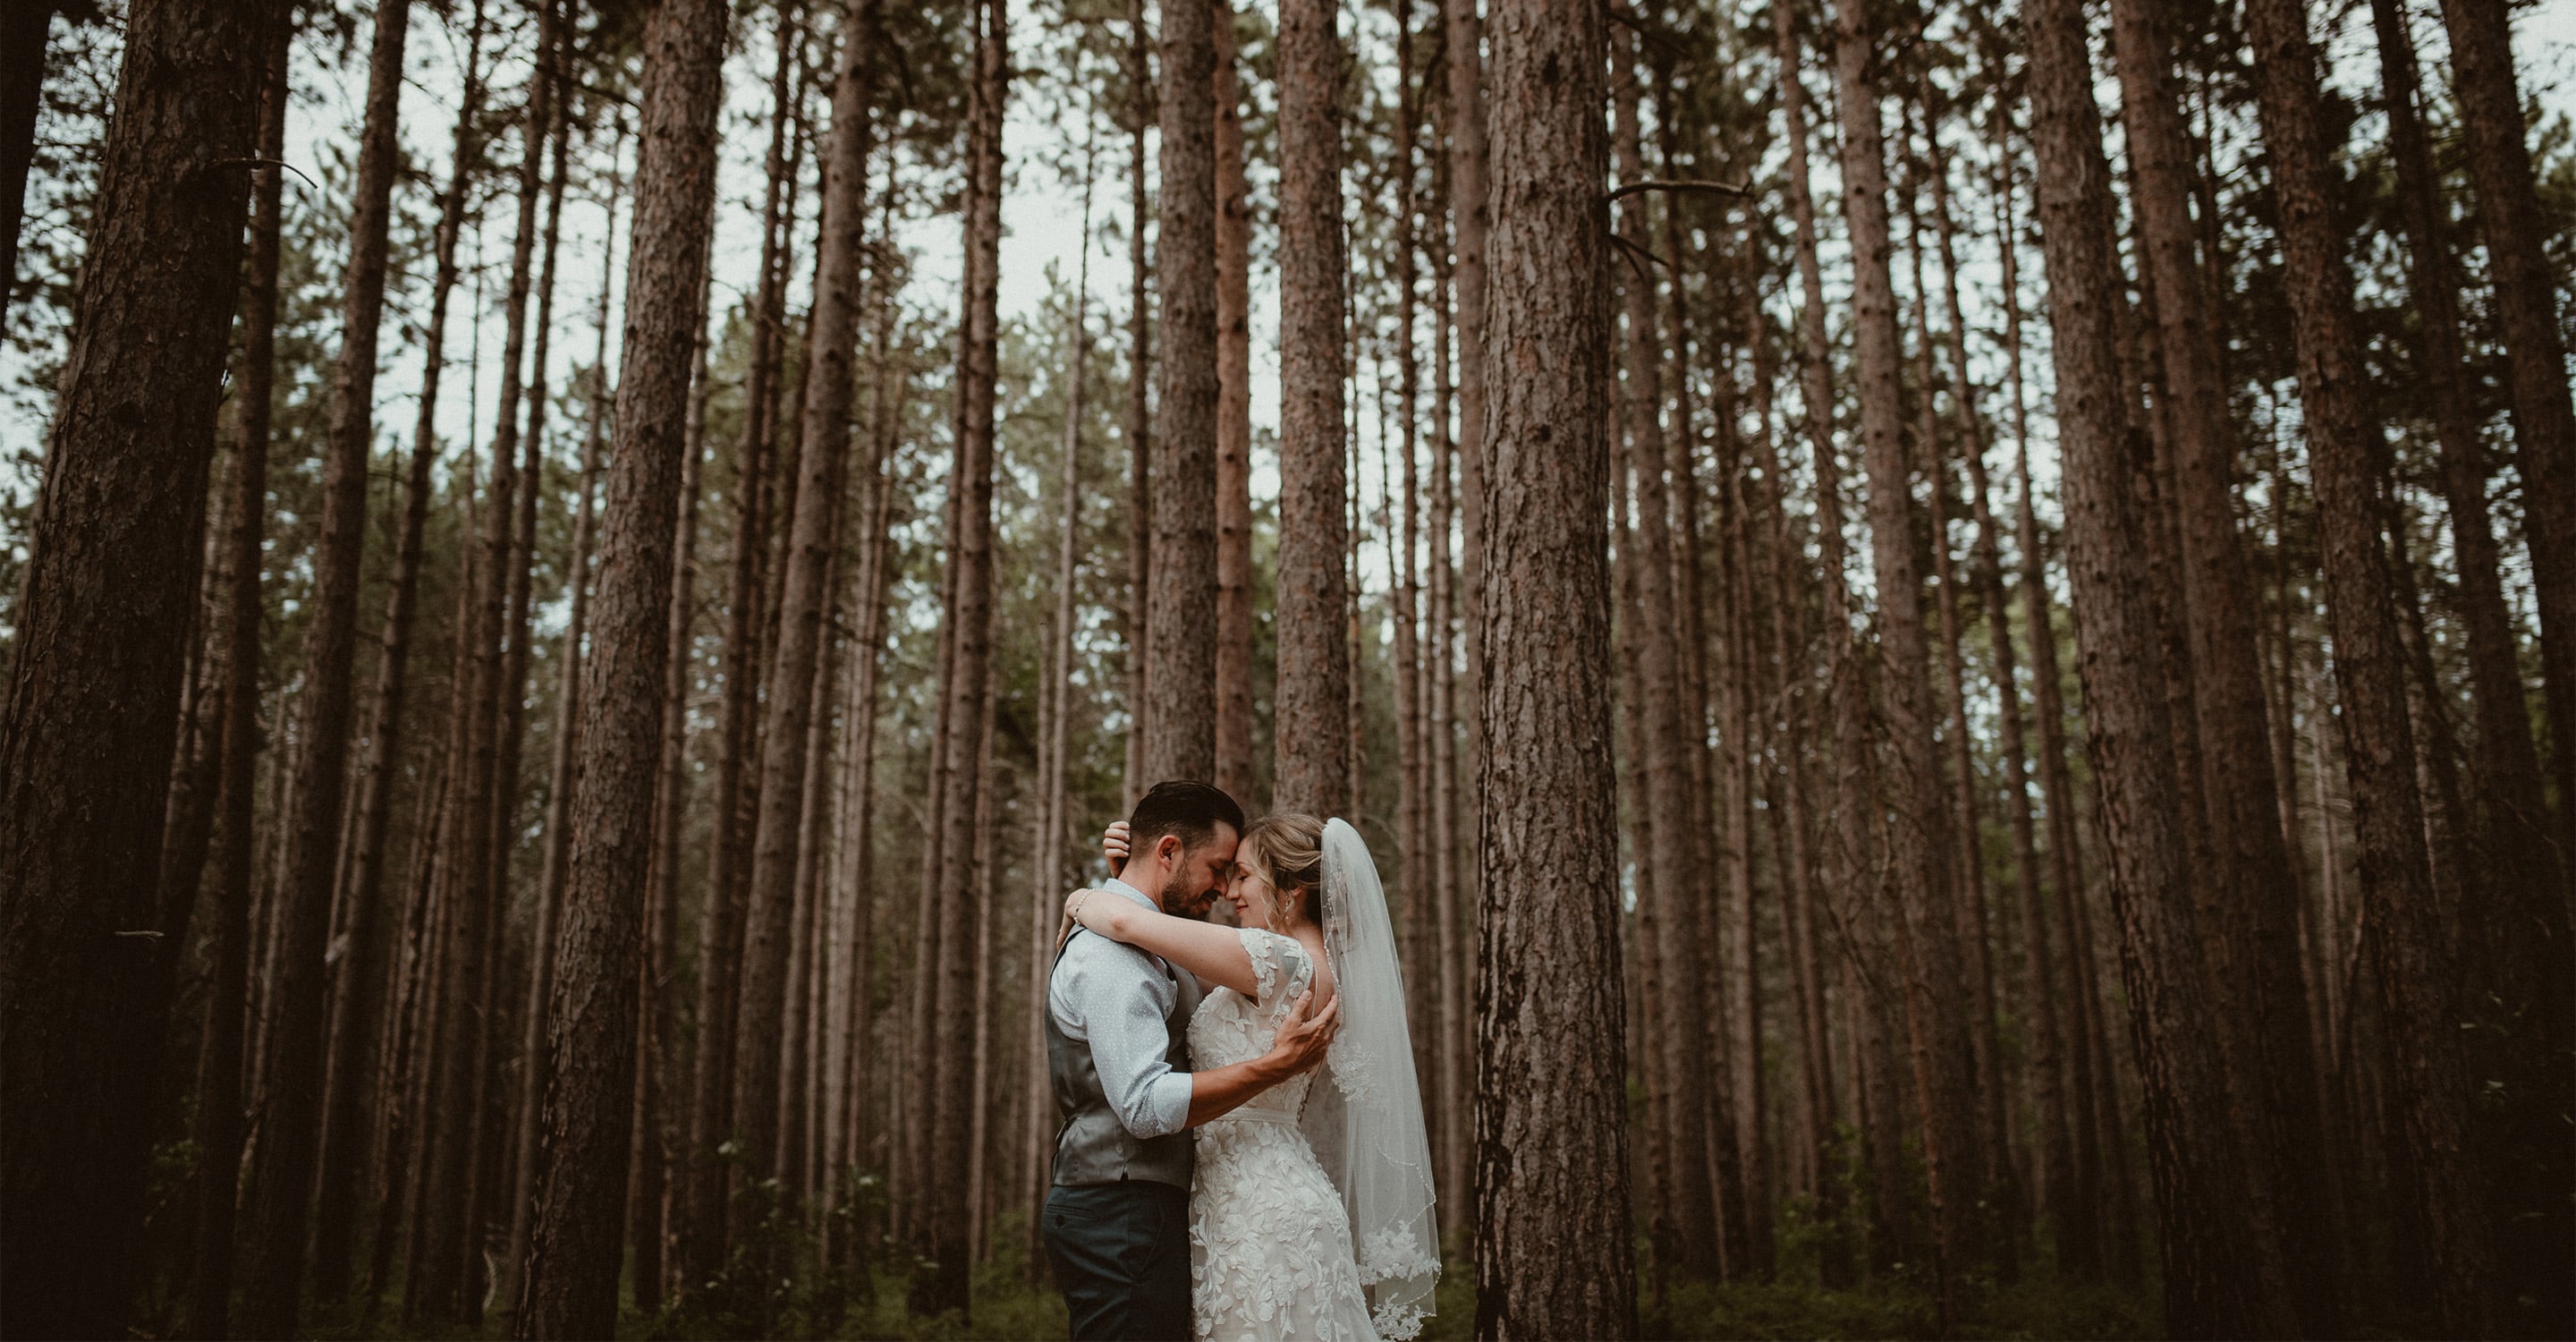 Small wedding in Mio, Michigan. Couple in wedding attire standing amongst tall pines in the woods.